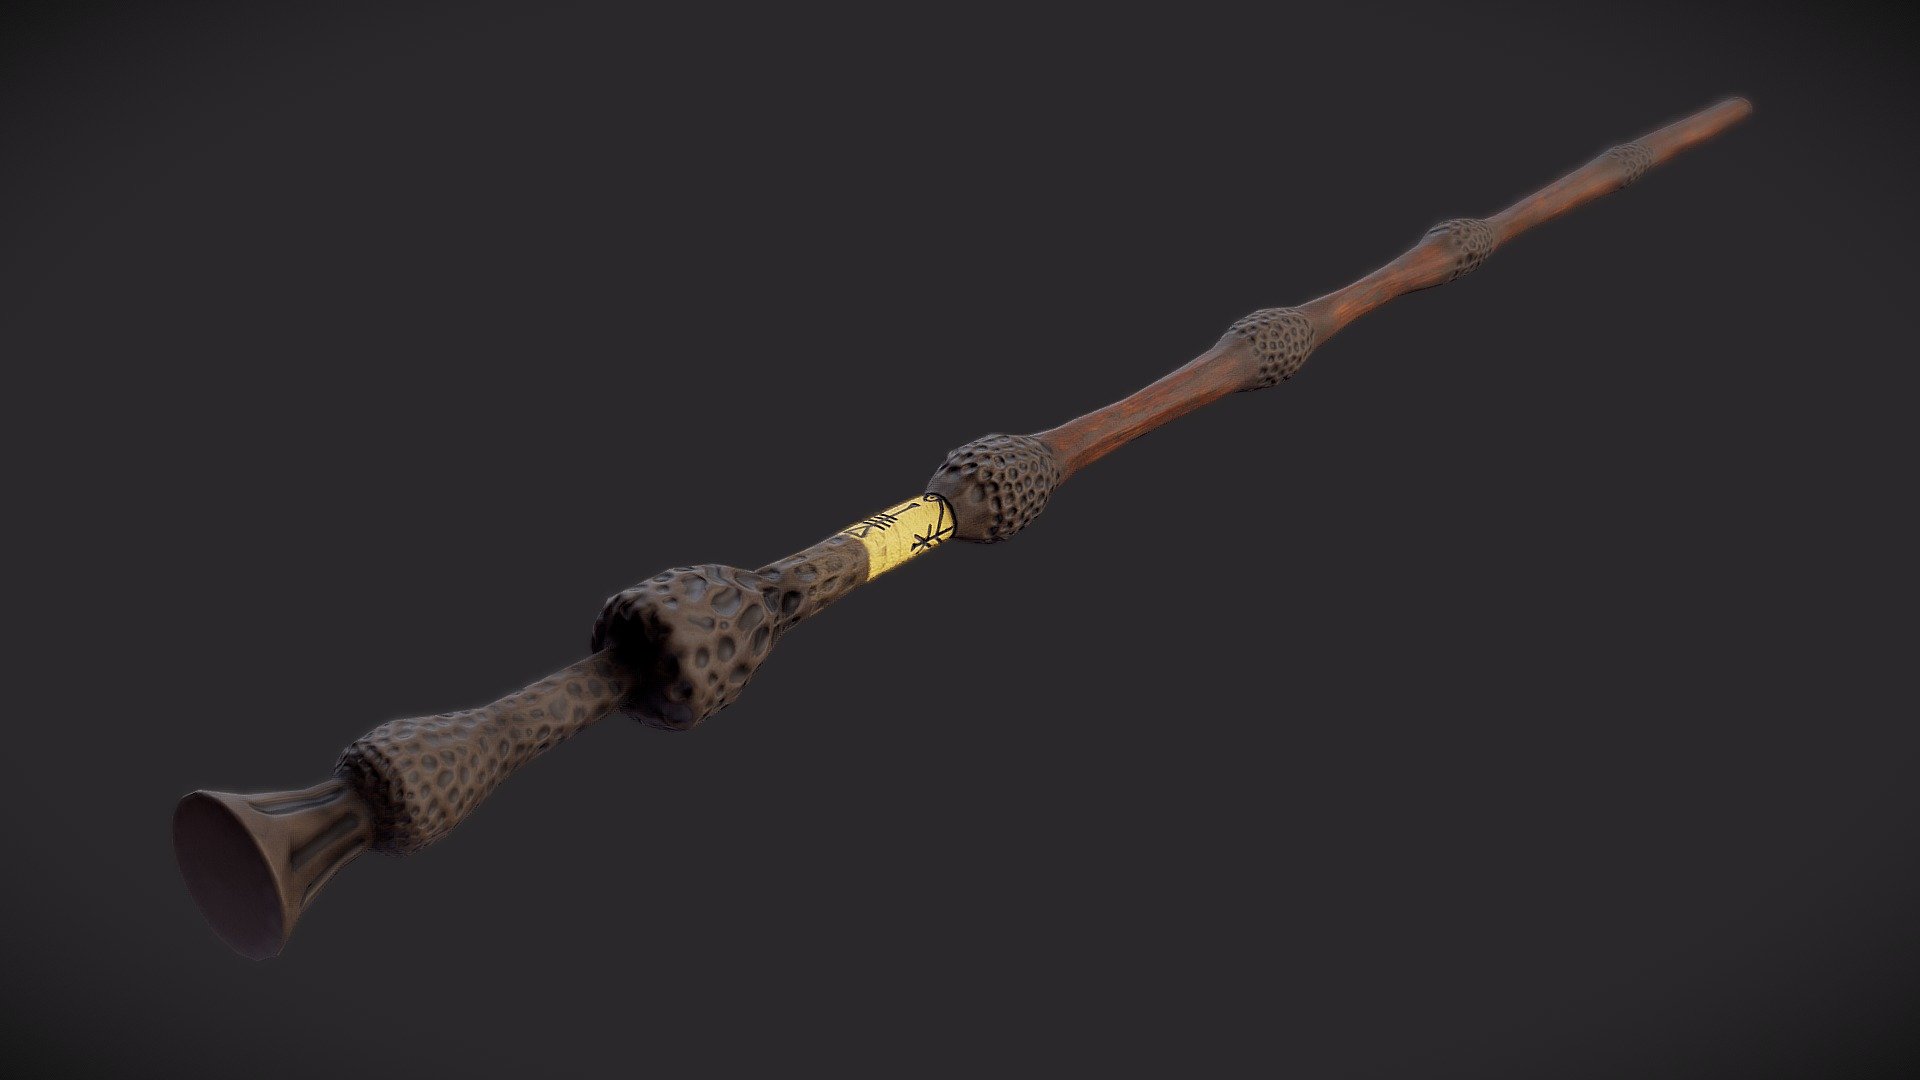 Updated Model, Old Model https://imgur.com/a/WmV6DX7 
Used reference from an Elder Wand Replica bought from The Noble Collection.

Music: &ldquo;The Elder Wand